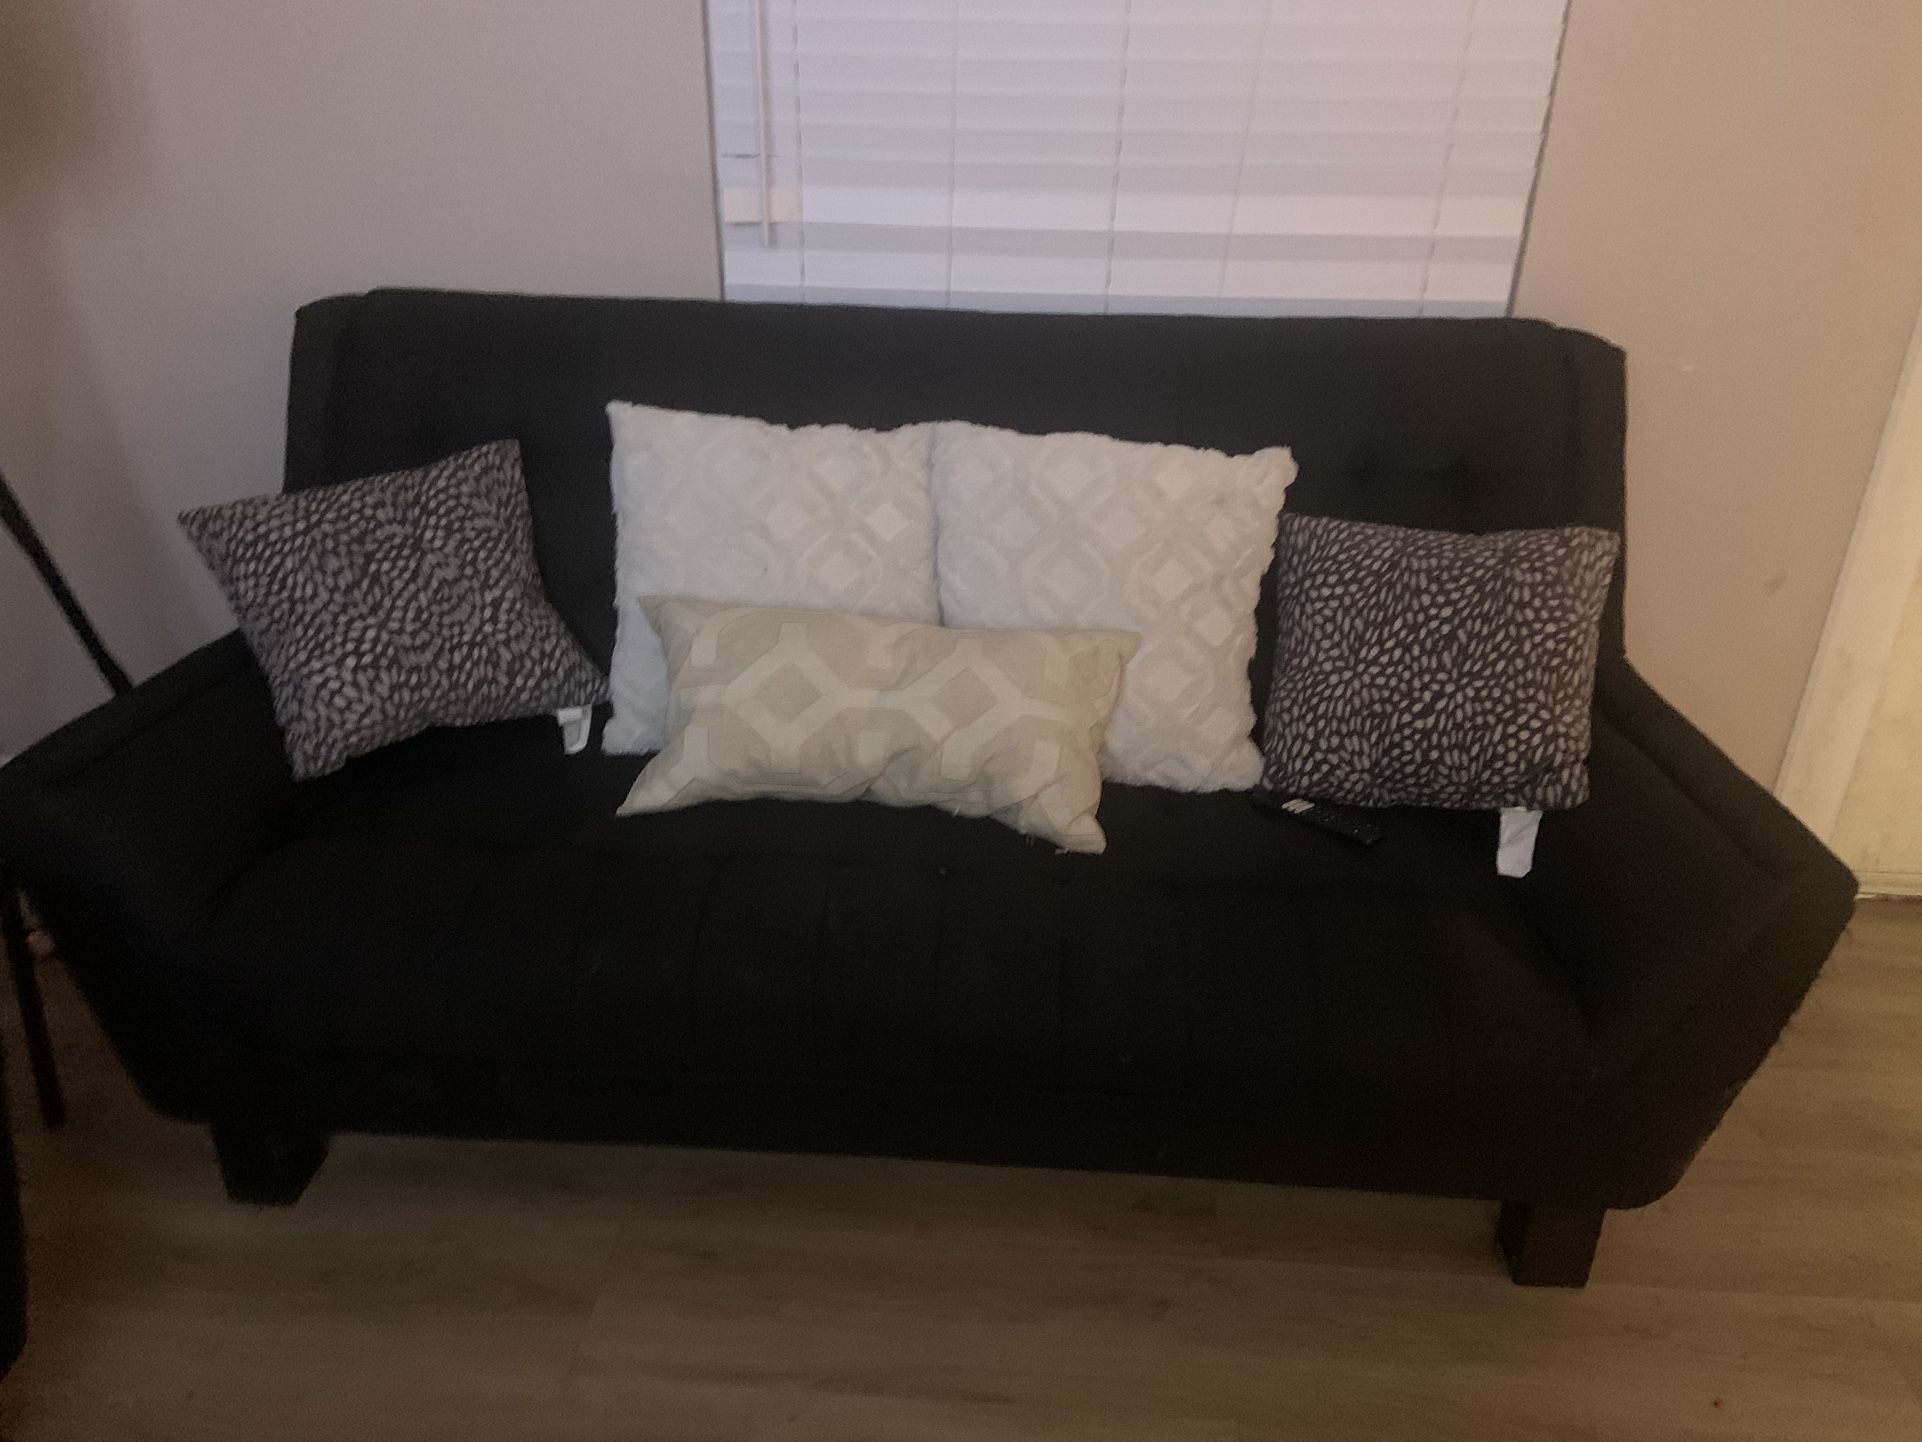 2 Couches 1 Corner Scratched  Price Negotiable 